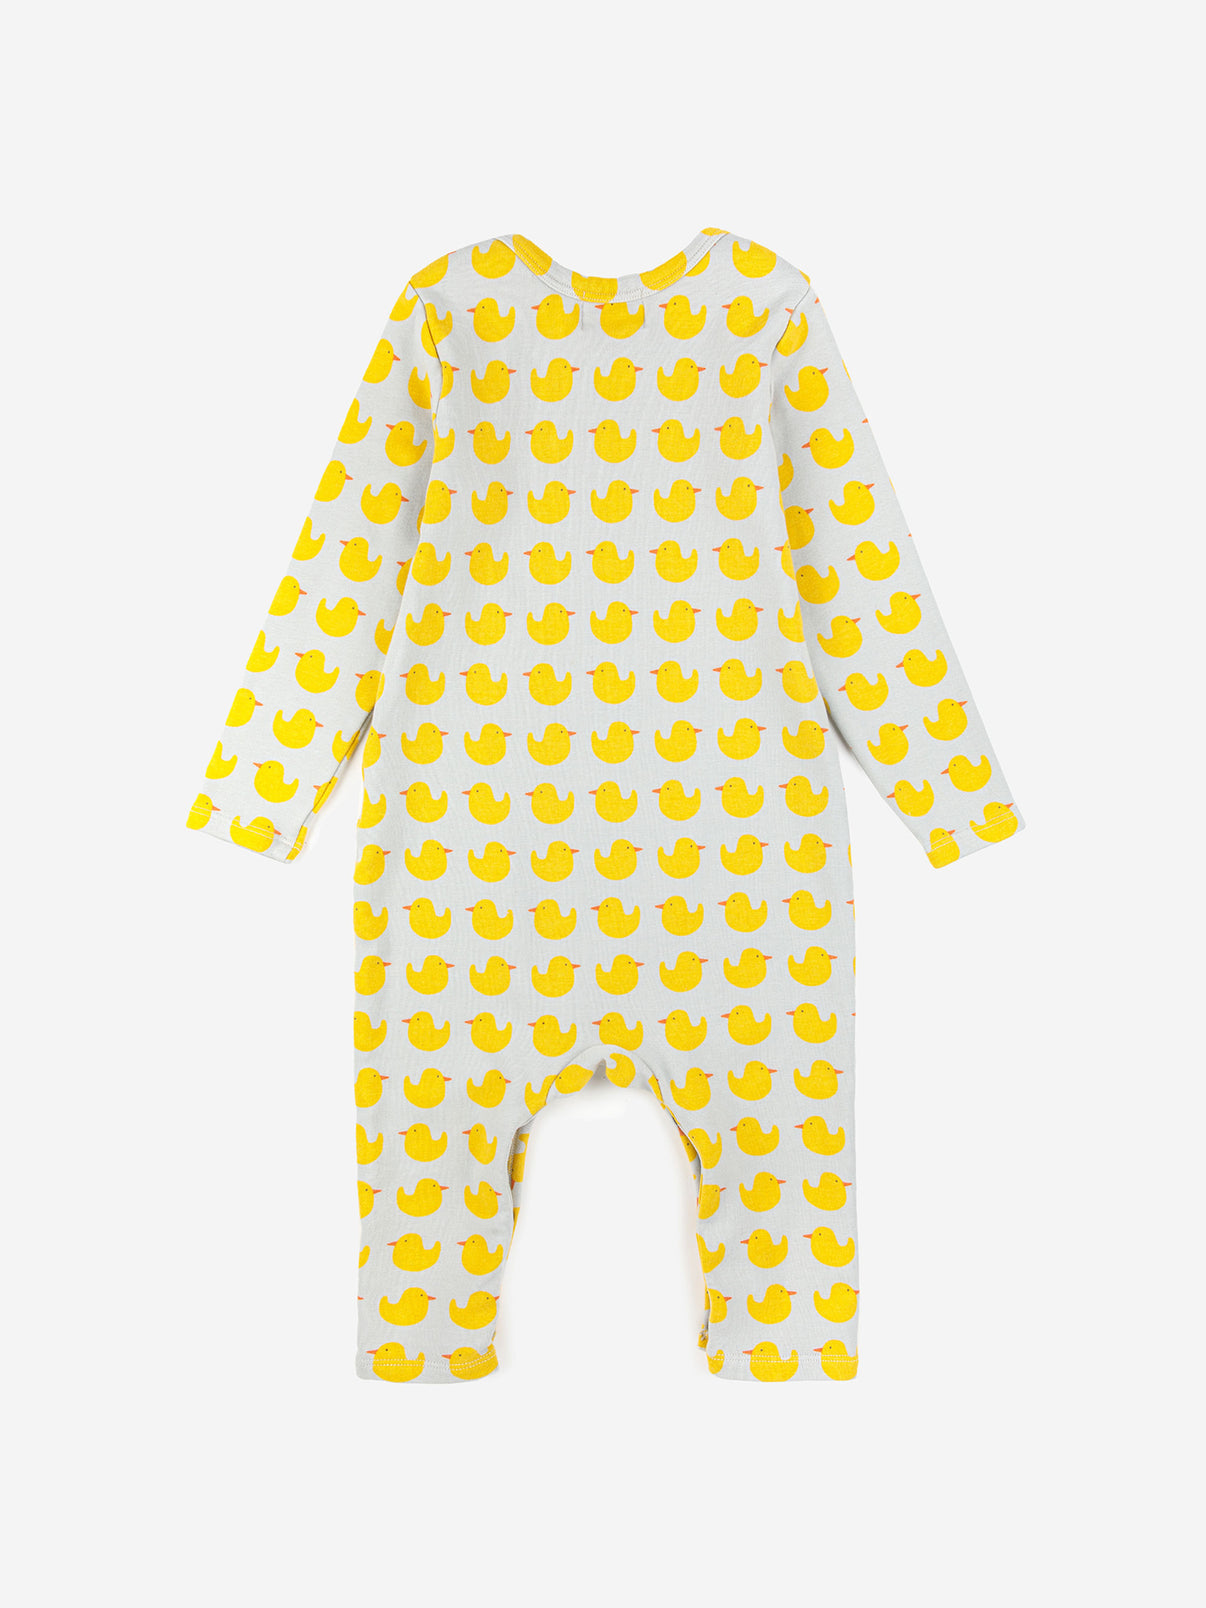 Bobo Choses Baby Rubber Duck All Over Overalls - 95% organic cotton 5% elastane light grey overall. Designed with long sleeves, crotch snap fastening, embroidery and envelope neck. It has a slim fit. Made in Spain.